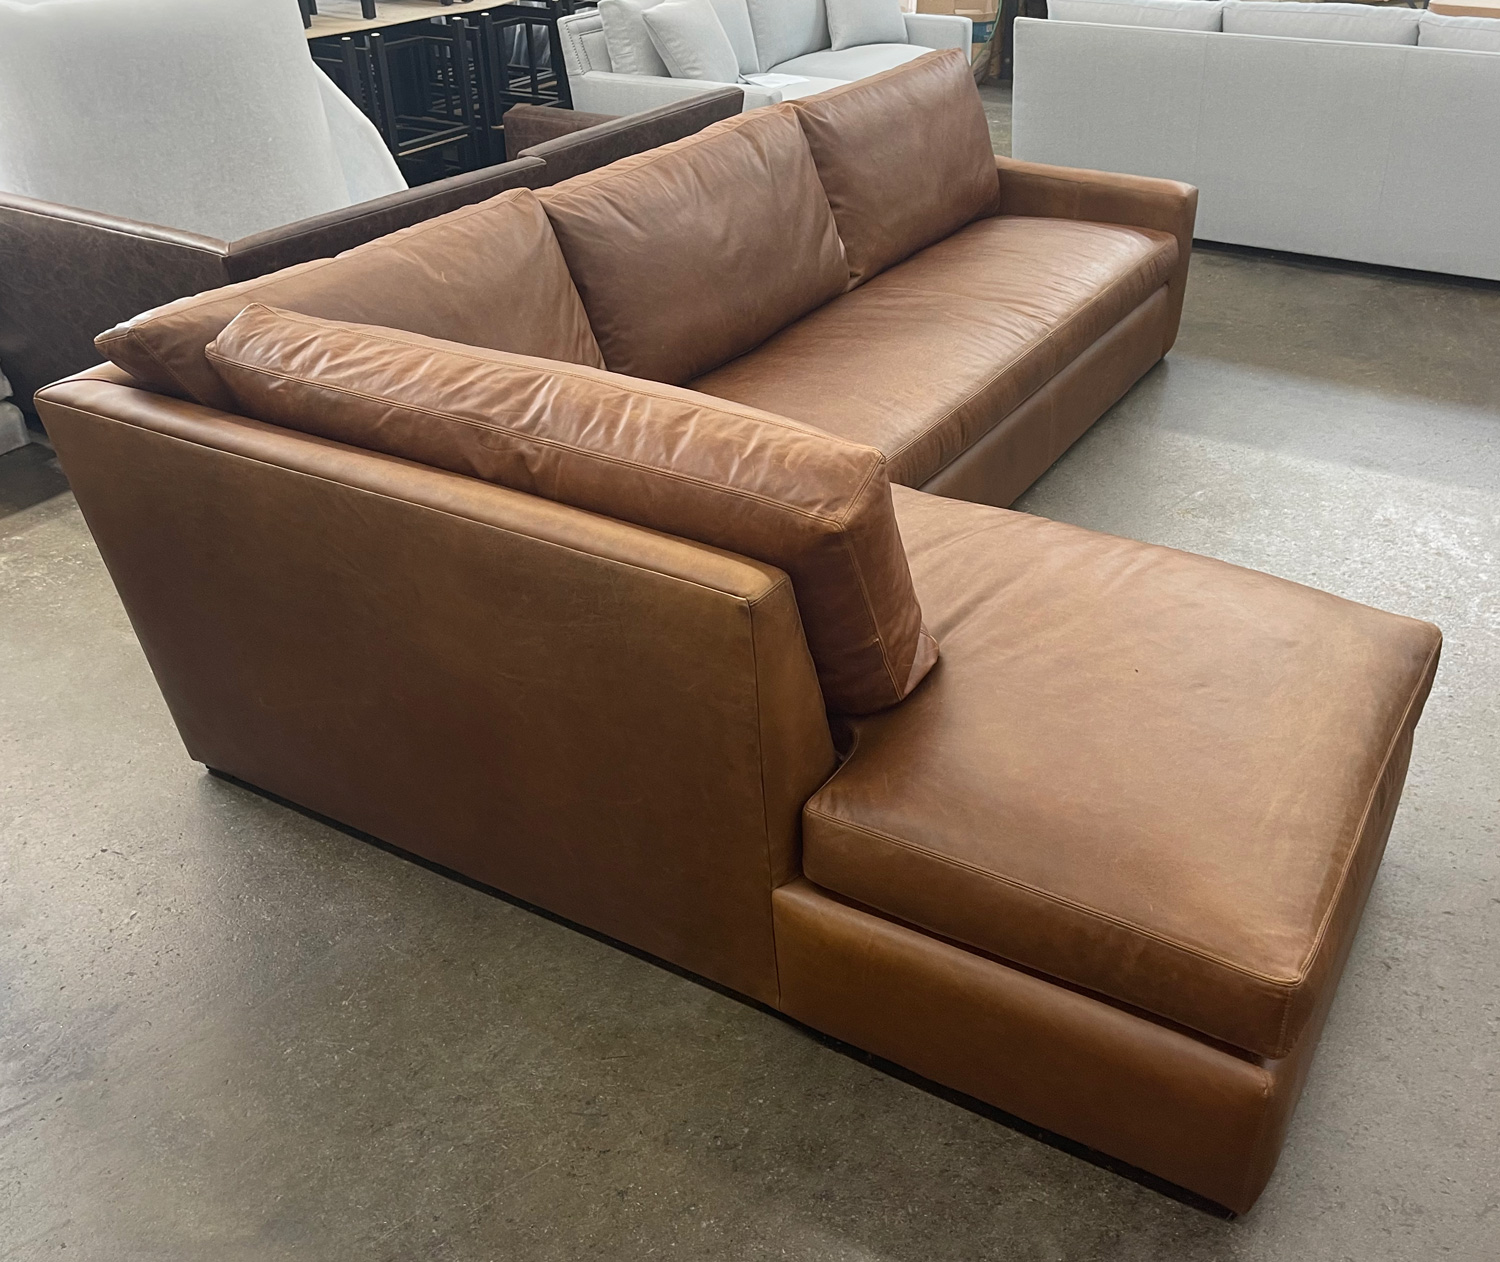 Julien Track Arm Leather Bumper Sectional Sofa in Italian Berkshire Chestnut-laf angle view